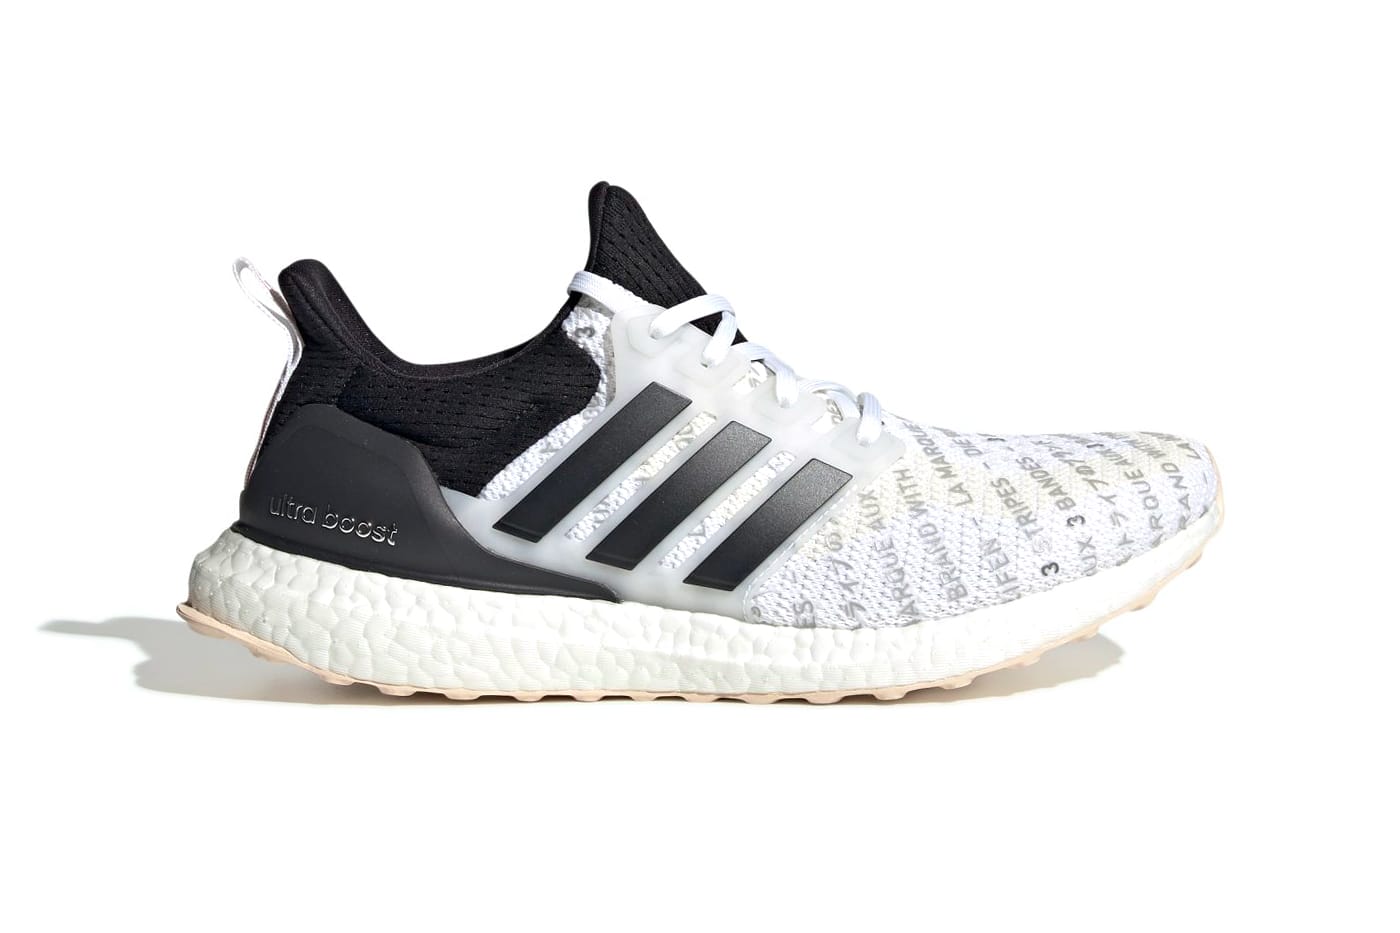 Scarpe Adidas Ultra Boost 2.0 Limited Edition Clearance, 59% OFF ... انواع الايفون